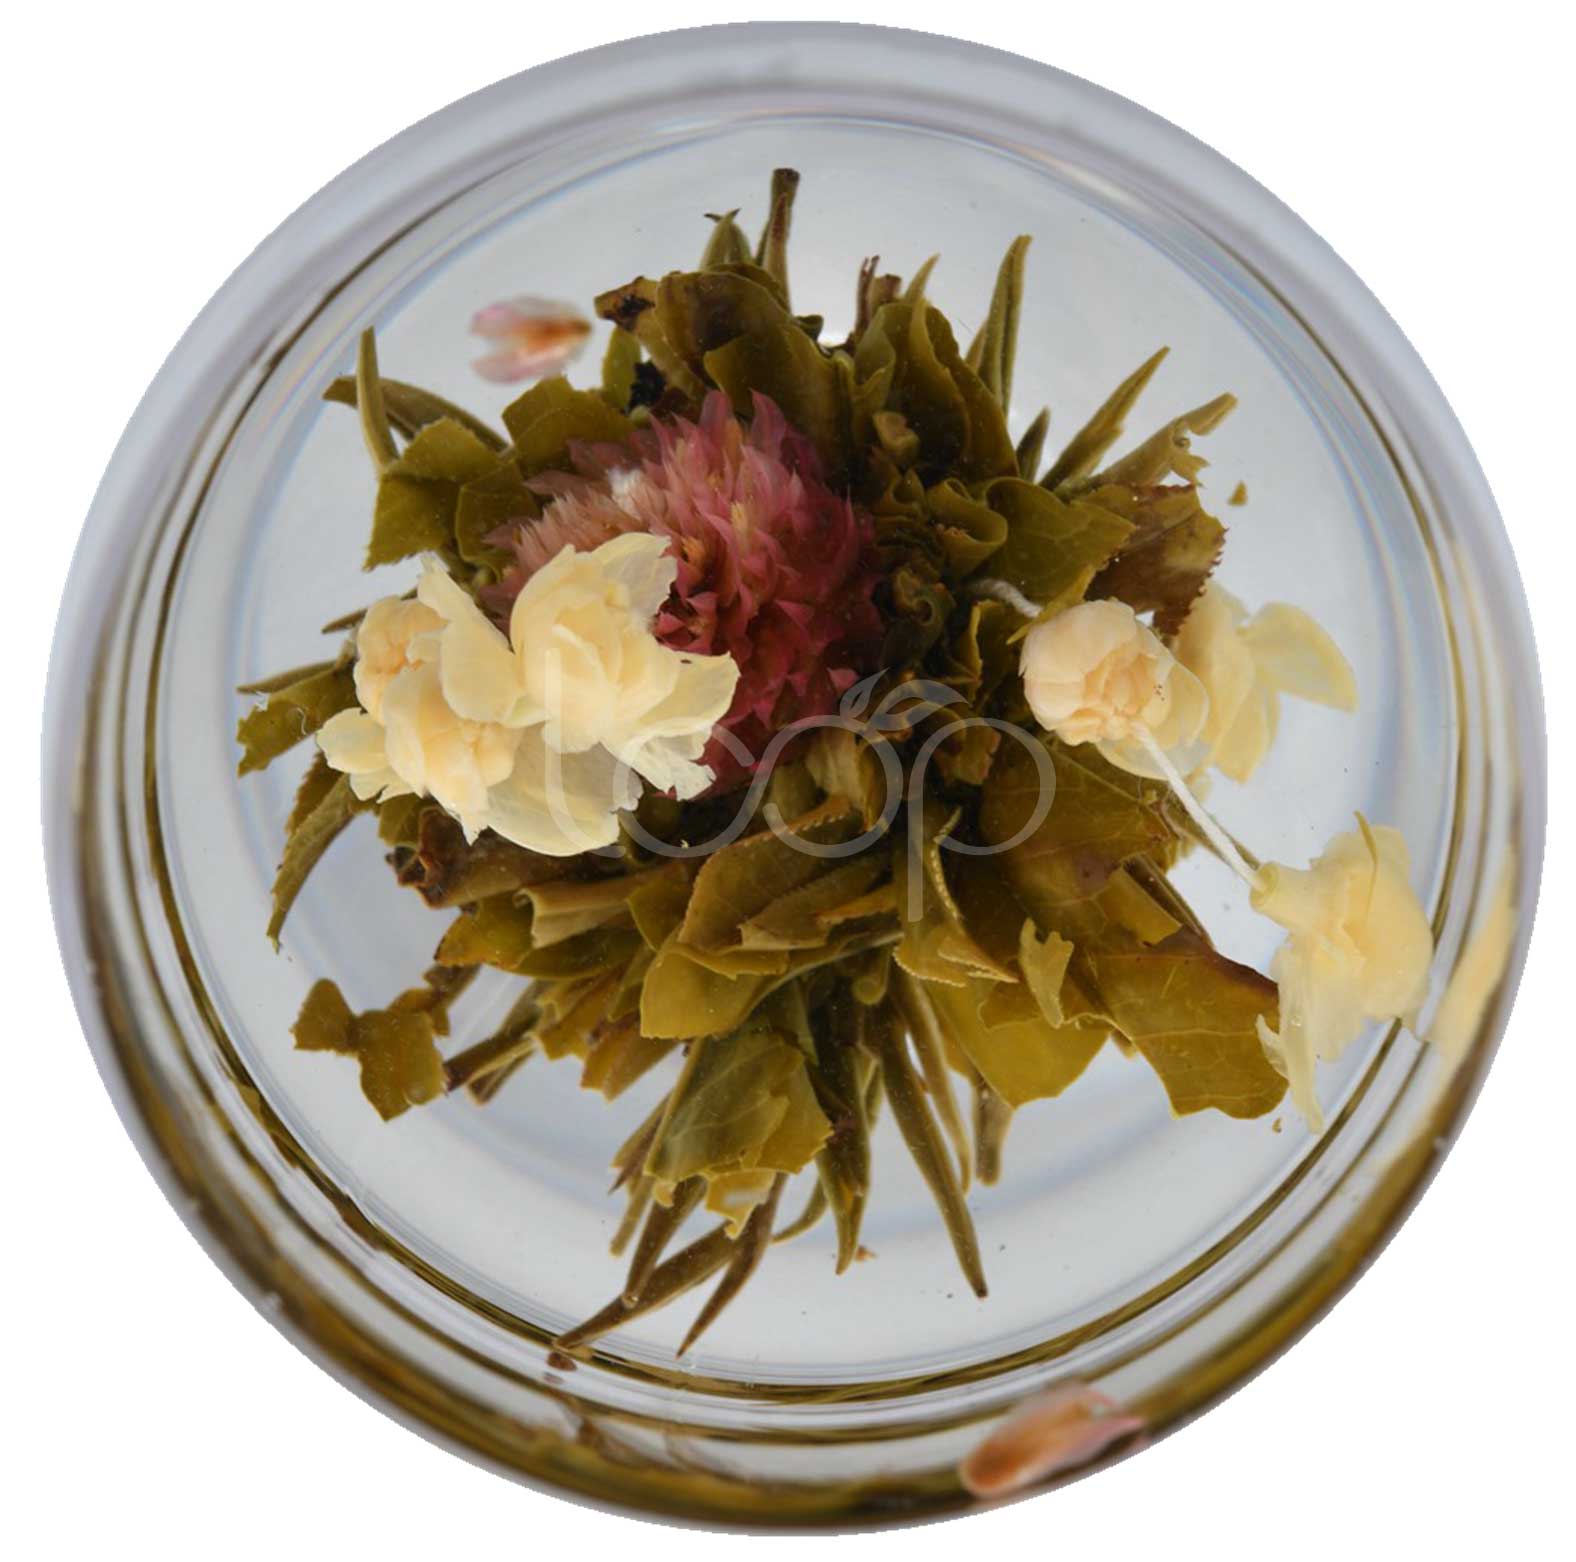 Blooming Tea Love At First Sight